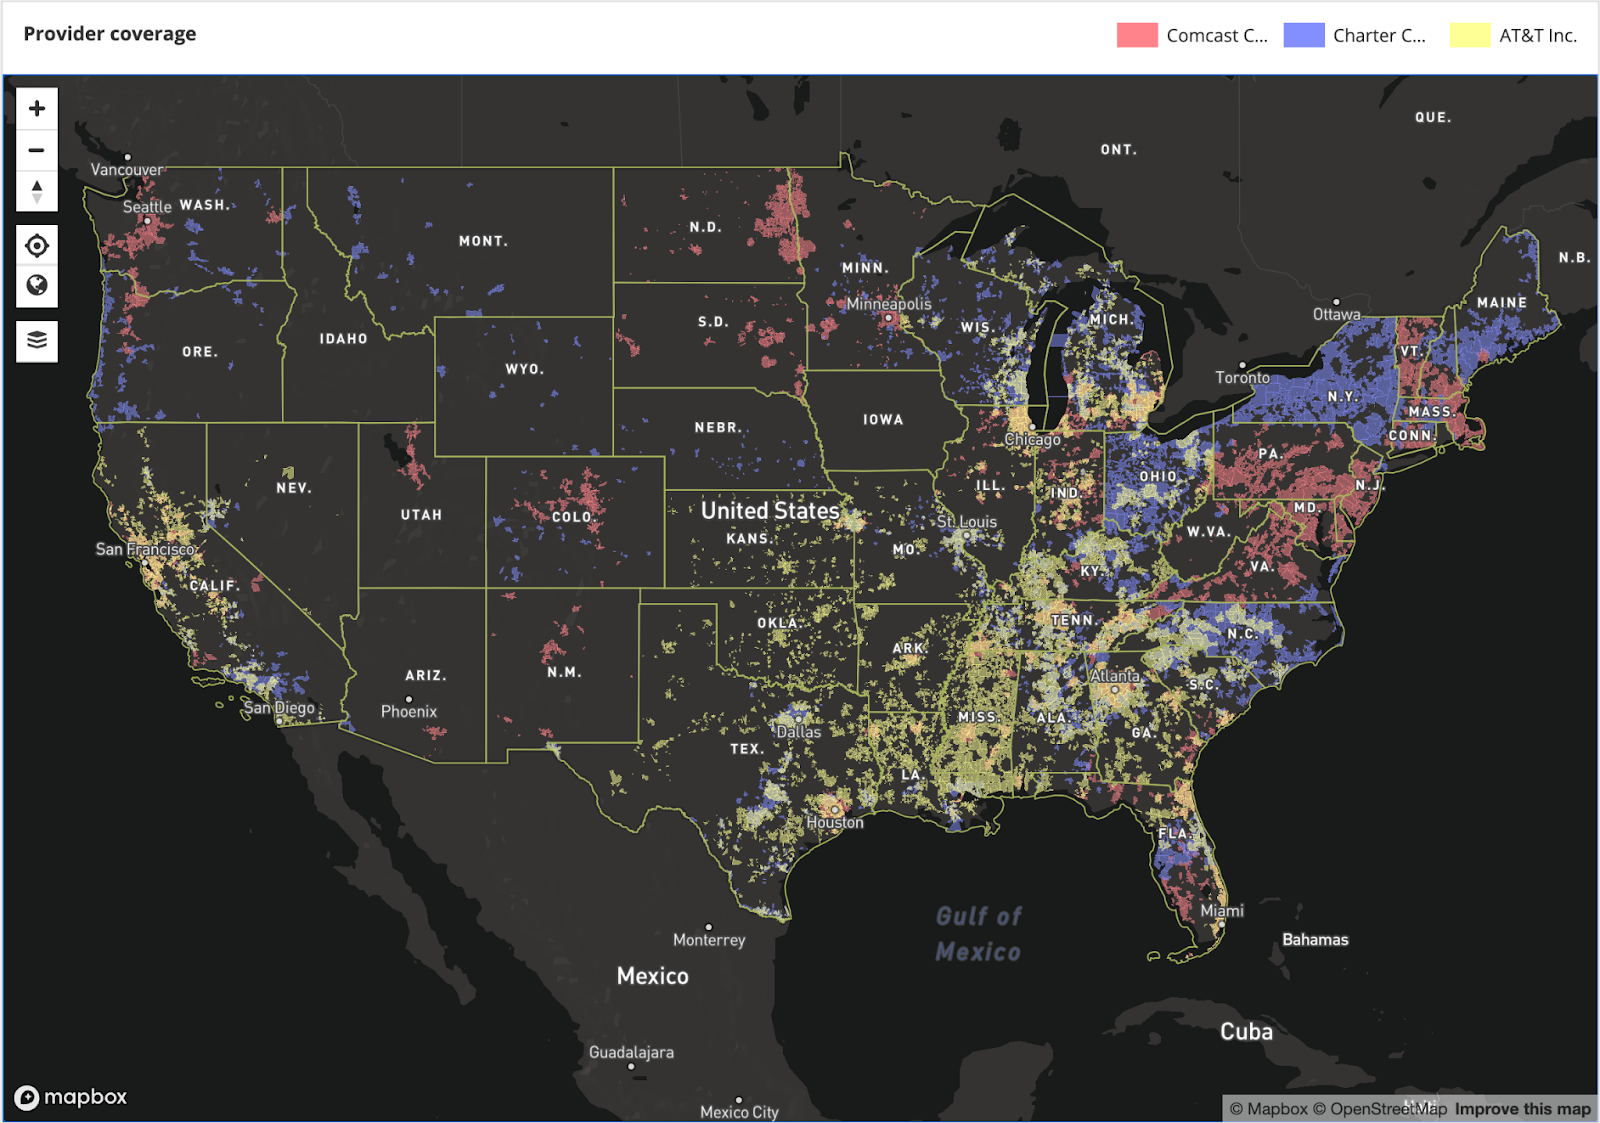 Screenshot of FCC map of internet provider coverage in the USA.